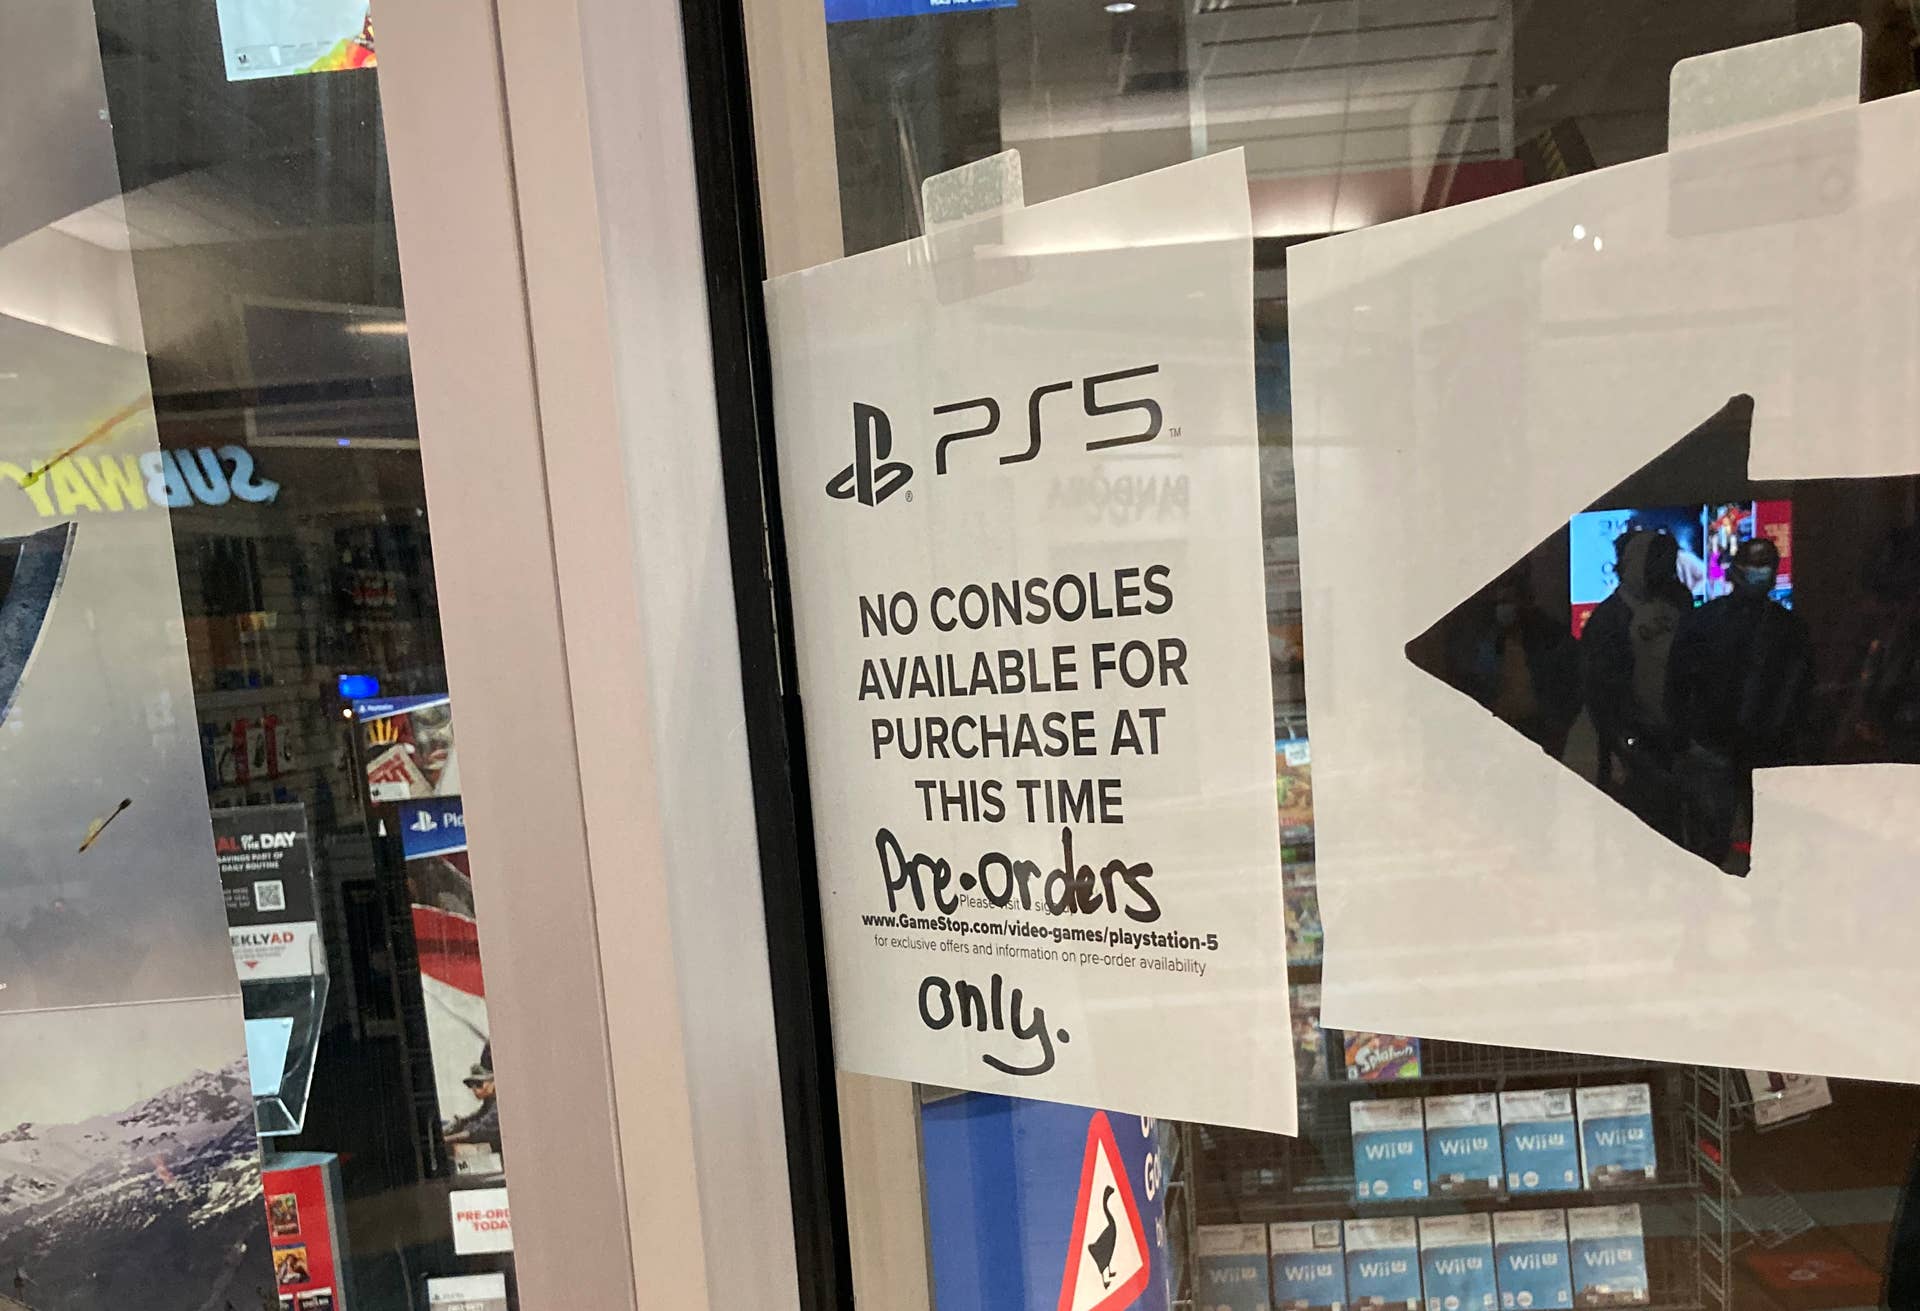 PS4 pre-owned block' hits GameStop shares